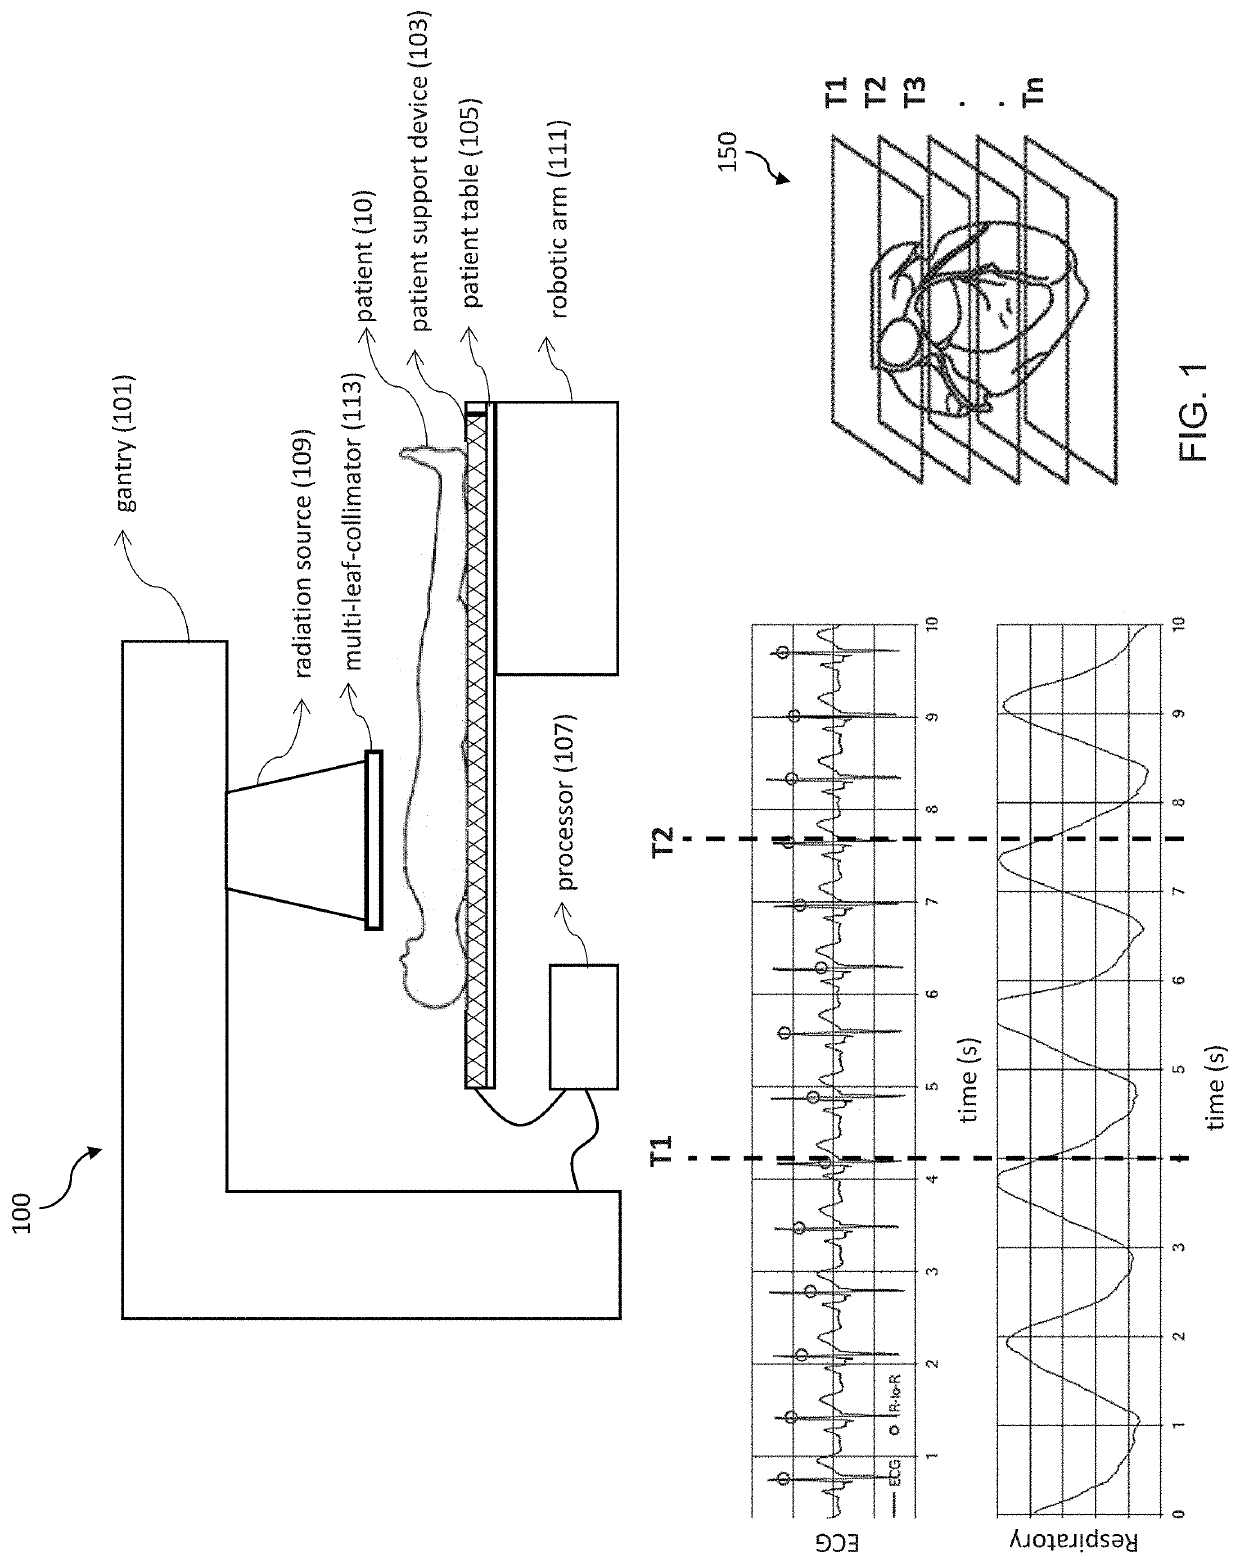 Systems and methods of body motion management during non-invasive imaging and treatment procedures